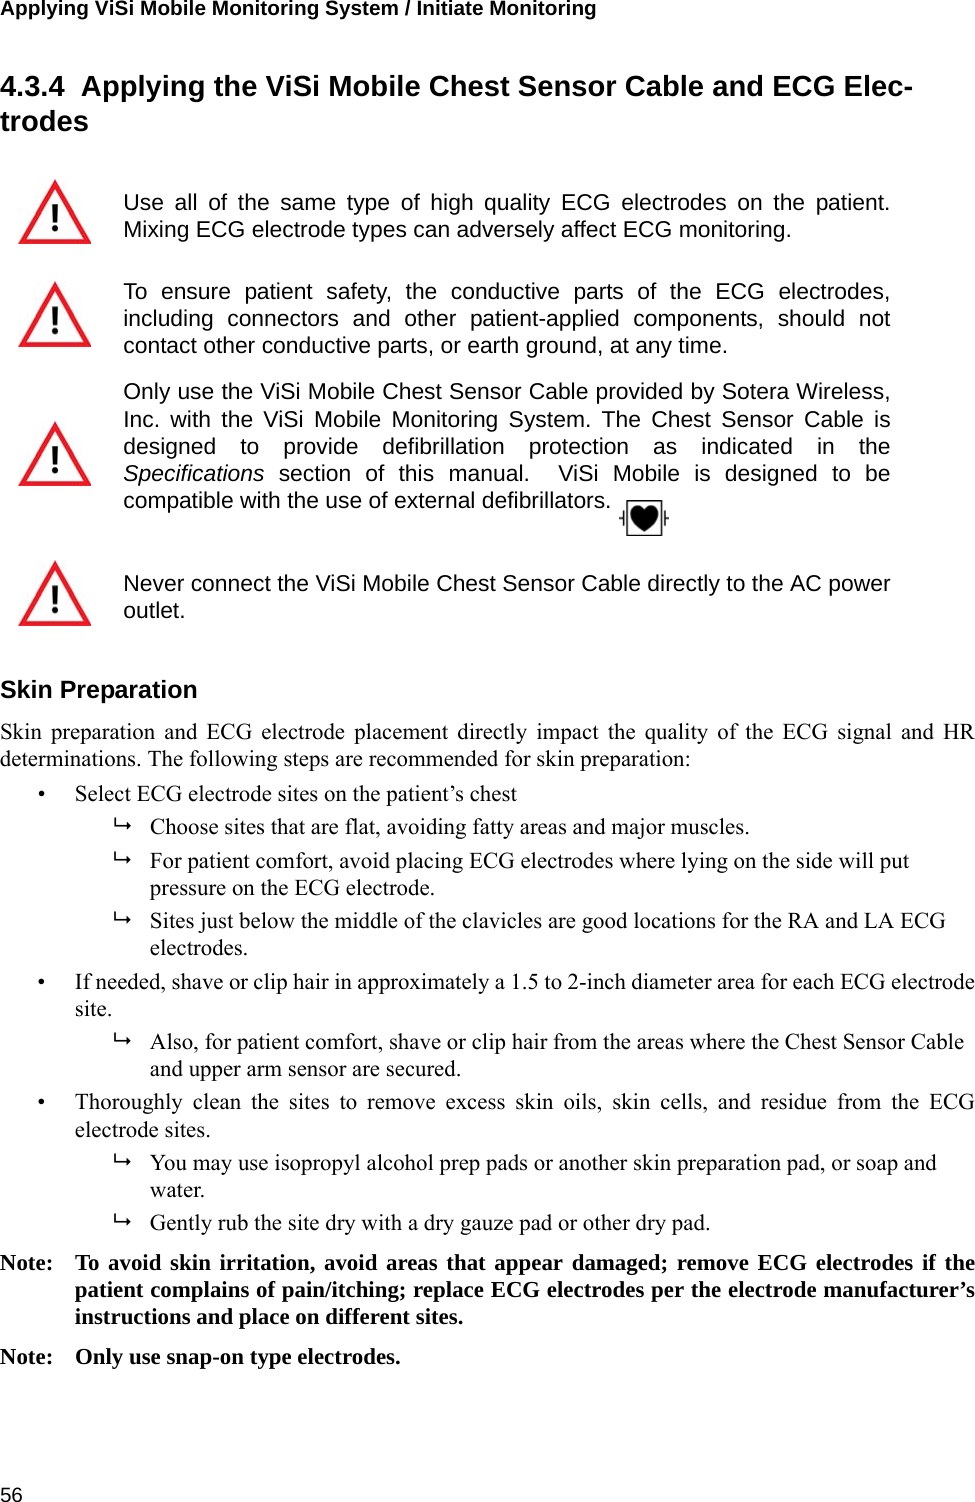 Applying ViSi Mobile Monitoring System / Initiate Monitoring 564.3.4  Applying the ViSi Mobile Chest Sensor Cable and ECG Elec-trodesSkin PreparationSkin preparation and ECG electrode placement directly impact the quality of the ECG signal and HRdeterminations. The following steps are recommended for skin preparation:• Select ECG electrode sites on the patient’s chestChoose sites that are flat, avoiding fatty areas and major muscles.For patient comfort, avoid placing ECG electrodes where lying on the side will put pressure on the ECG electrode.Sites just below the middle of the clavicles are good locations for the RA and LA ECG electrodes.• If needed, shave or clip hair in approximately a 1.5 to 2-inch diameter area for each ECG electrodesite.Also, for patient comfort, shave or clip hair from the areas where the Chest Sensor Cable and upper arm sensor are secured.• Thoroughly clean the sites to remove excess skin oils, skin cells, and residue from the ECGelectrode sites.You may use isopropyl alcohol prep pads or another skin preparation pad, or soap and water.Gently rub the site dry with a dry gauze pad or other dry pad.Note: To avoid skin irritation, avoid areas that appear damaged; remove ECG electrodes if thepatient complains of pain/itching; replace ECG electrodes per the electrode manufacturer’sinstructions and place on different sites.Note: Only use snap-on type electrodes.Use all of the same type of high quality ECG electrodes on the patient.Mixing ECG electrode types can adversely affect ECG monitoring.To ensure patient safety, the conductive parts of the ECG electrodes,including connectors and other patient-applied components, should notcontact other conductive parts, or earth ground, at any time.Only use the ViSi Mobile Chest Sensor Cable provided by Sotera Wireless,Inc. with the ViSi Mobile Monitoring System. The Chest Sensor Cable isdesigned to provide defibrillation protection as indicated in theSpecifications section of this manual.  ViSi Mobile is designed to becompatible with the use of external defibrillators.Never connect the ViSi Mobile Chest Sensor Cable directly to the AC poweroutlet.